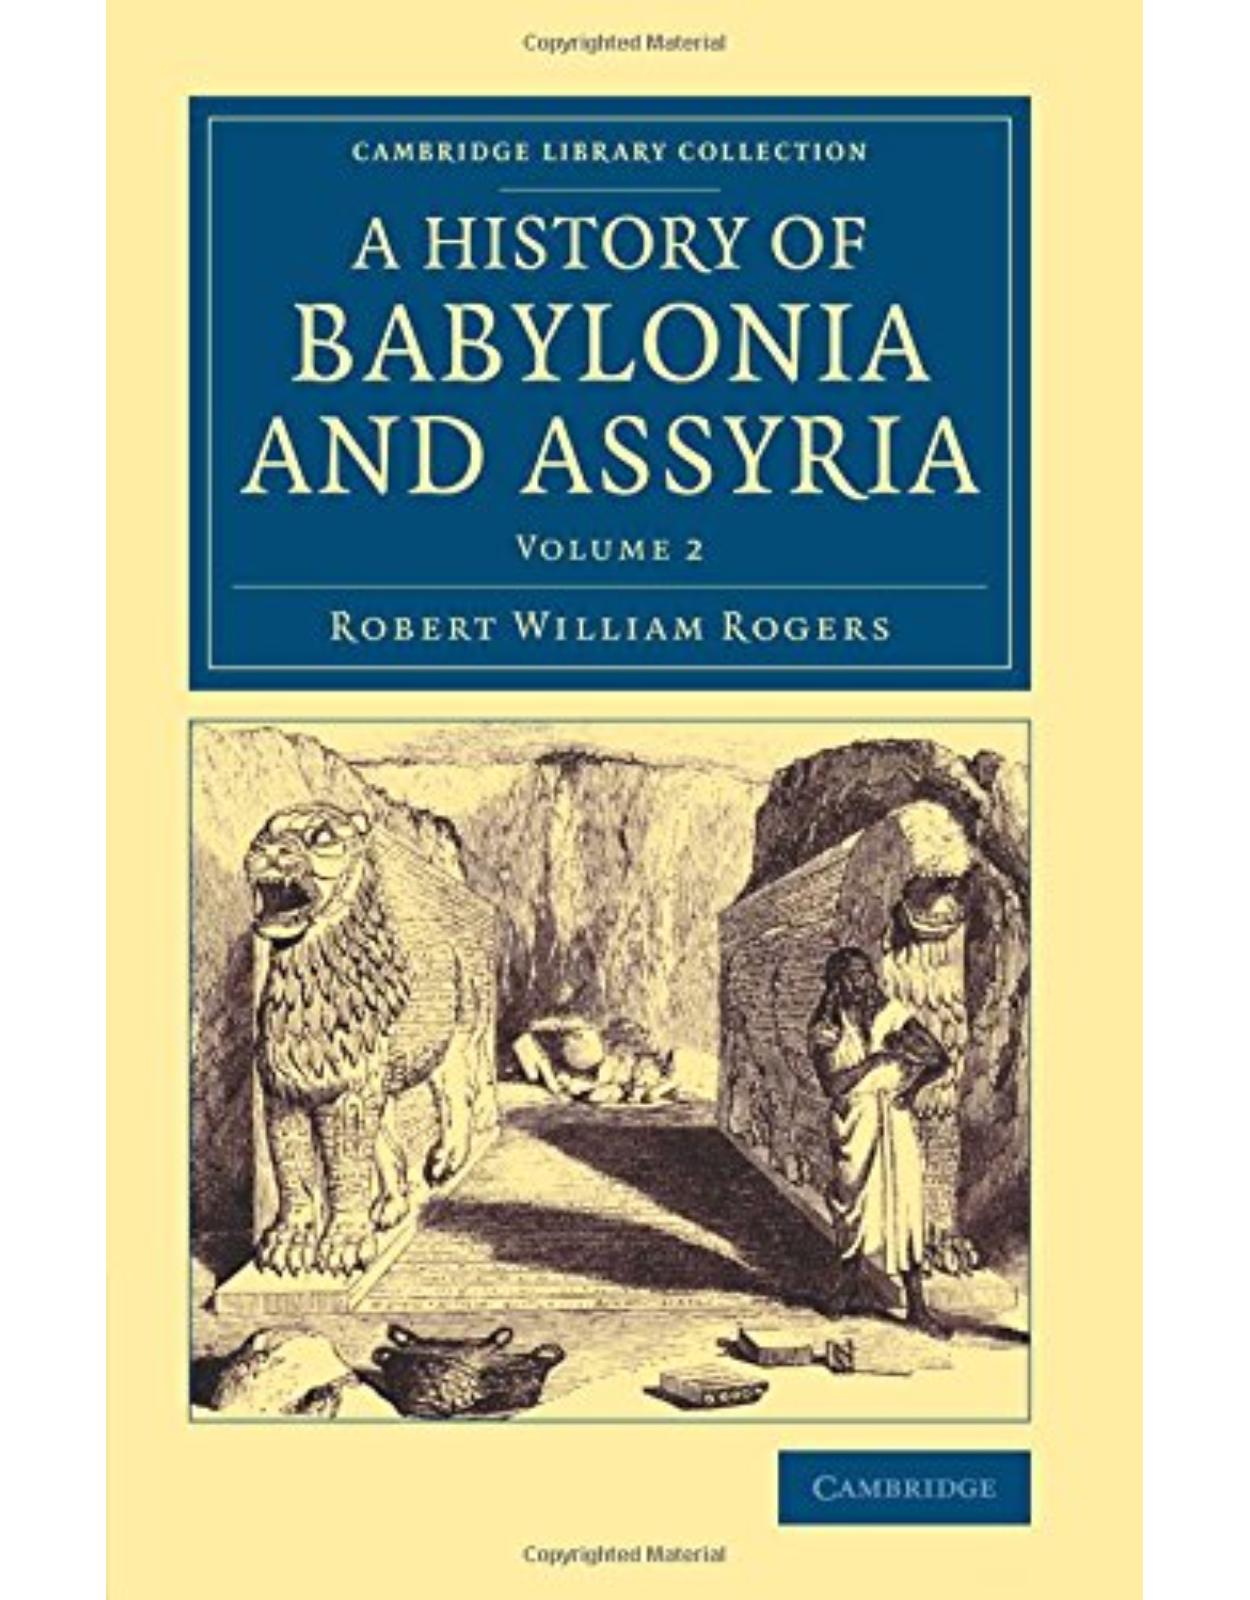 History of Babylonia and Assyria: Volume 2 (Cambridge Library Collection - Archaeology)